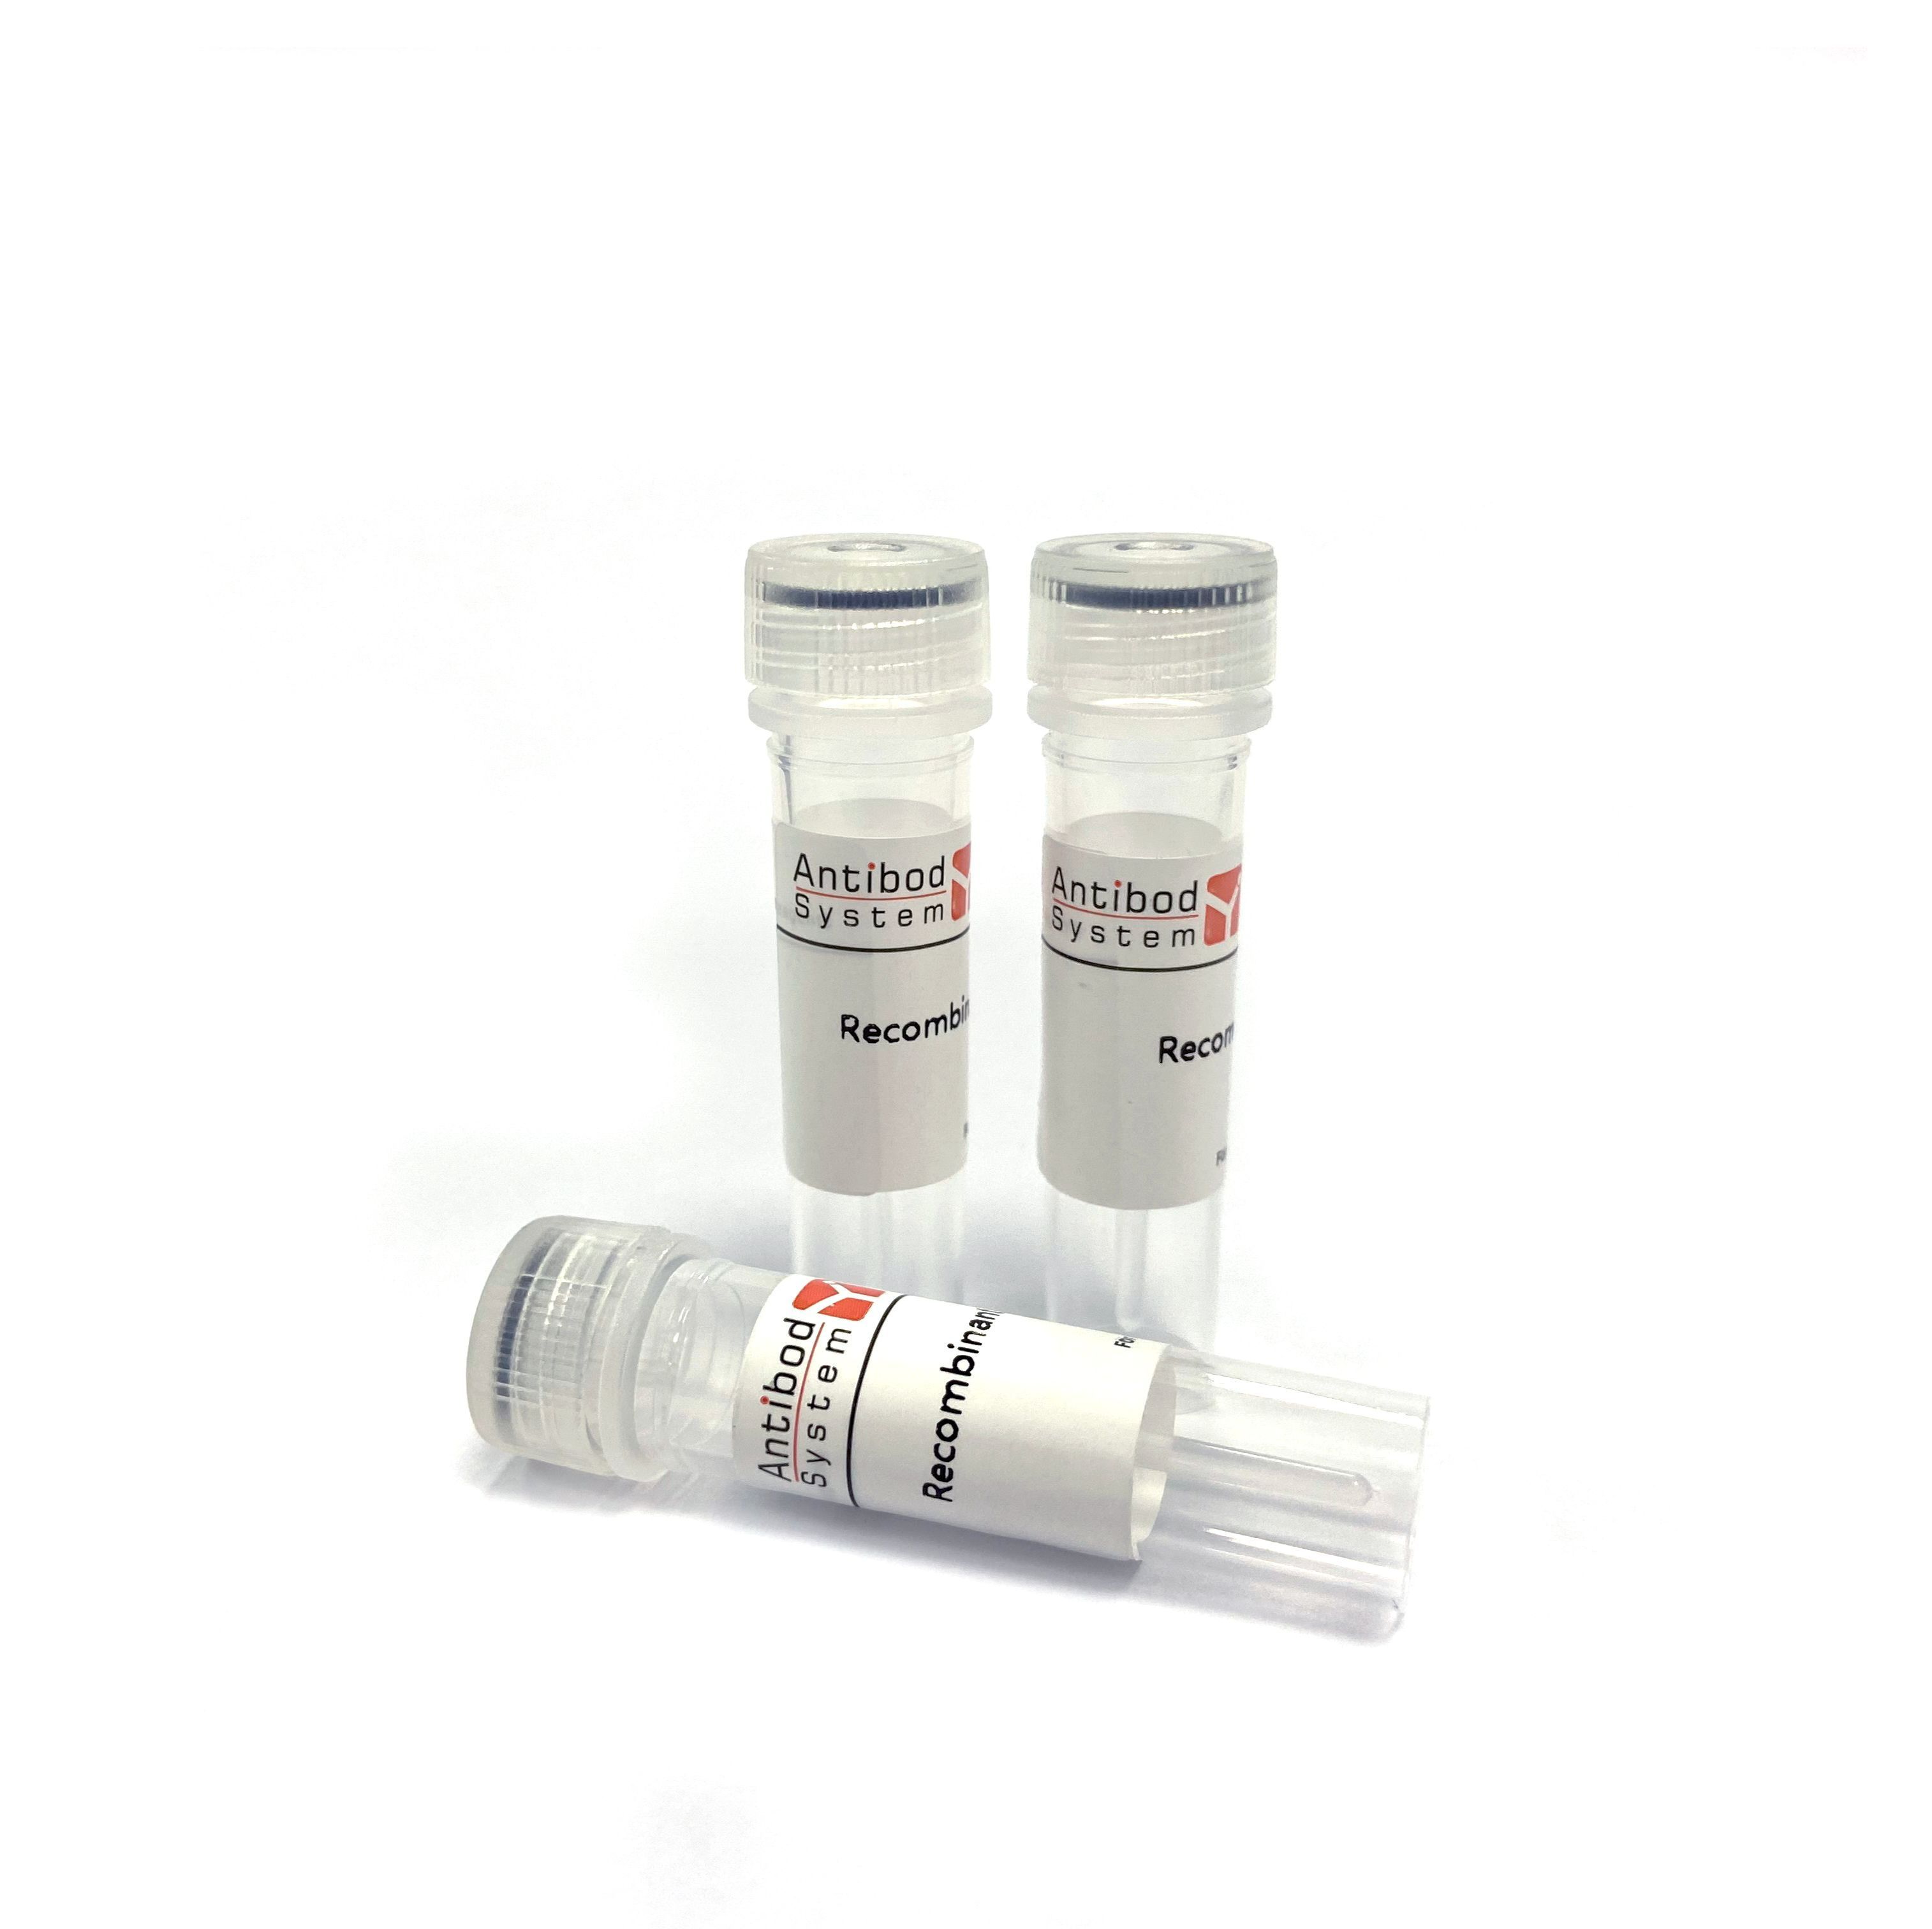 Recombinant HPV16 E6/Protein E6 Protein, N-His（重组蛋白） | HPV16 E6/Protein E6蛋白 | HPV16 E6/Protein E6 Protein